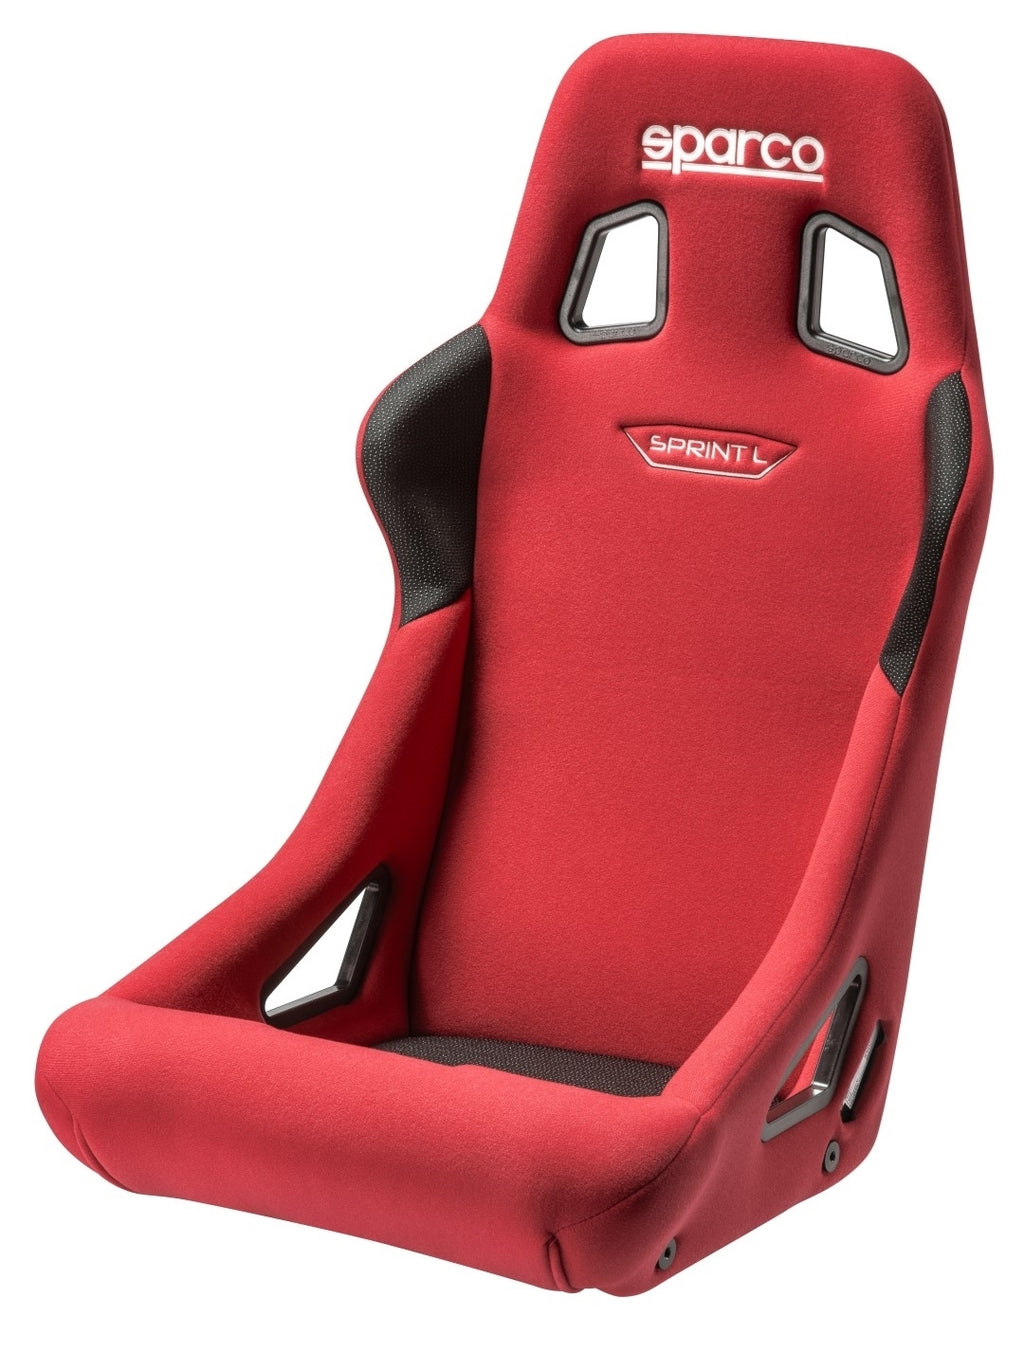 Sparco - Sprint L Competition Seat